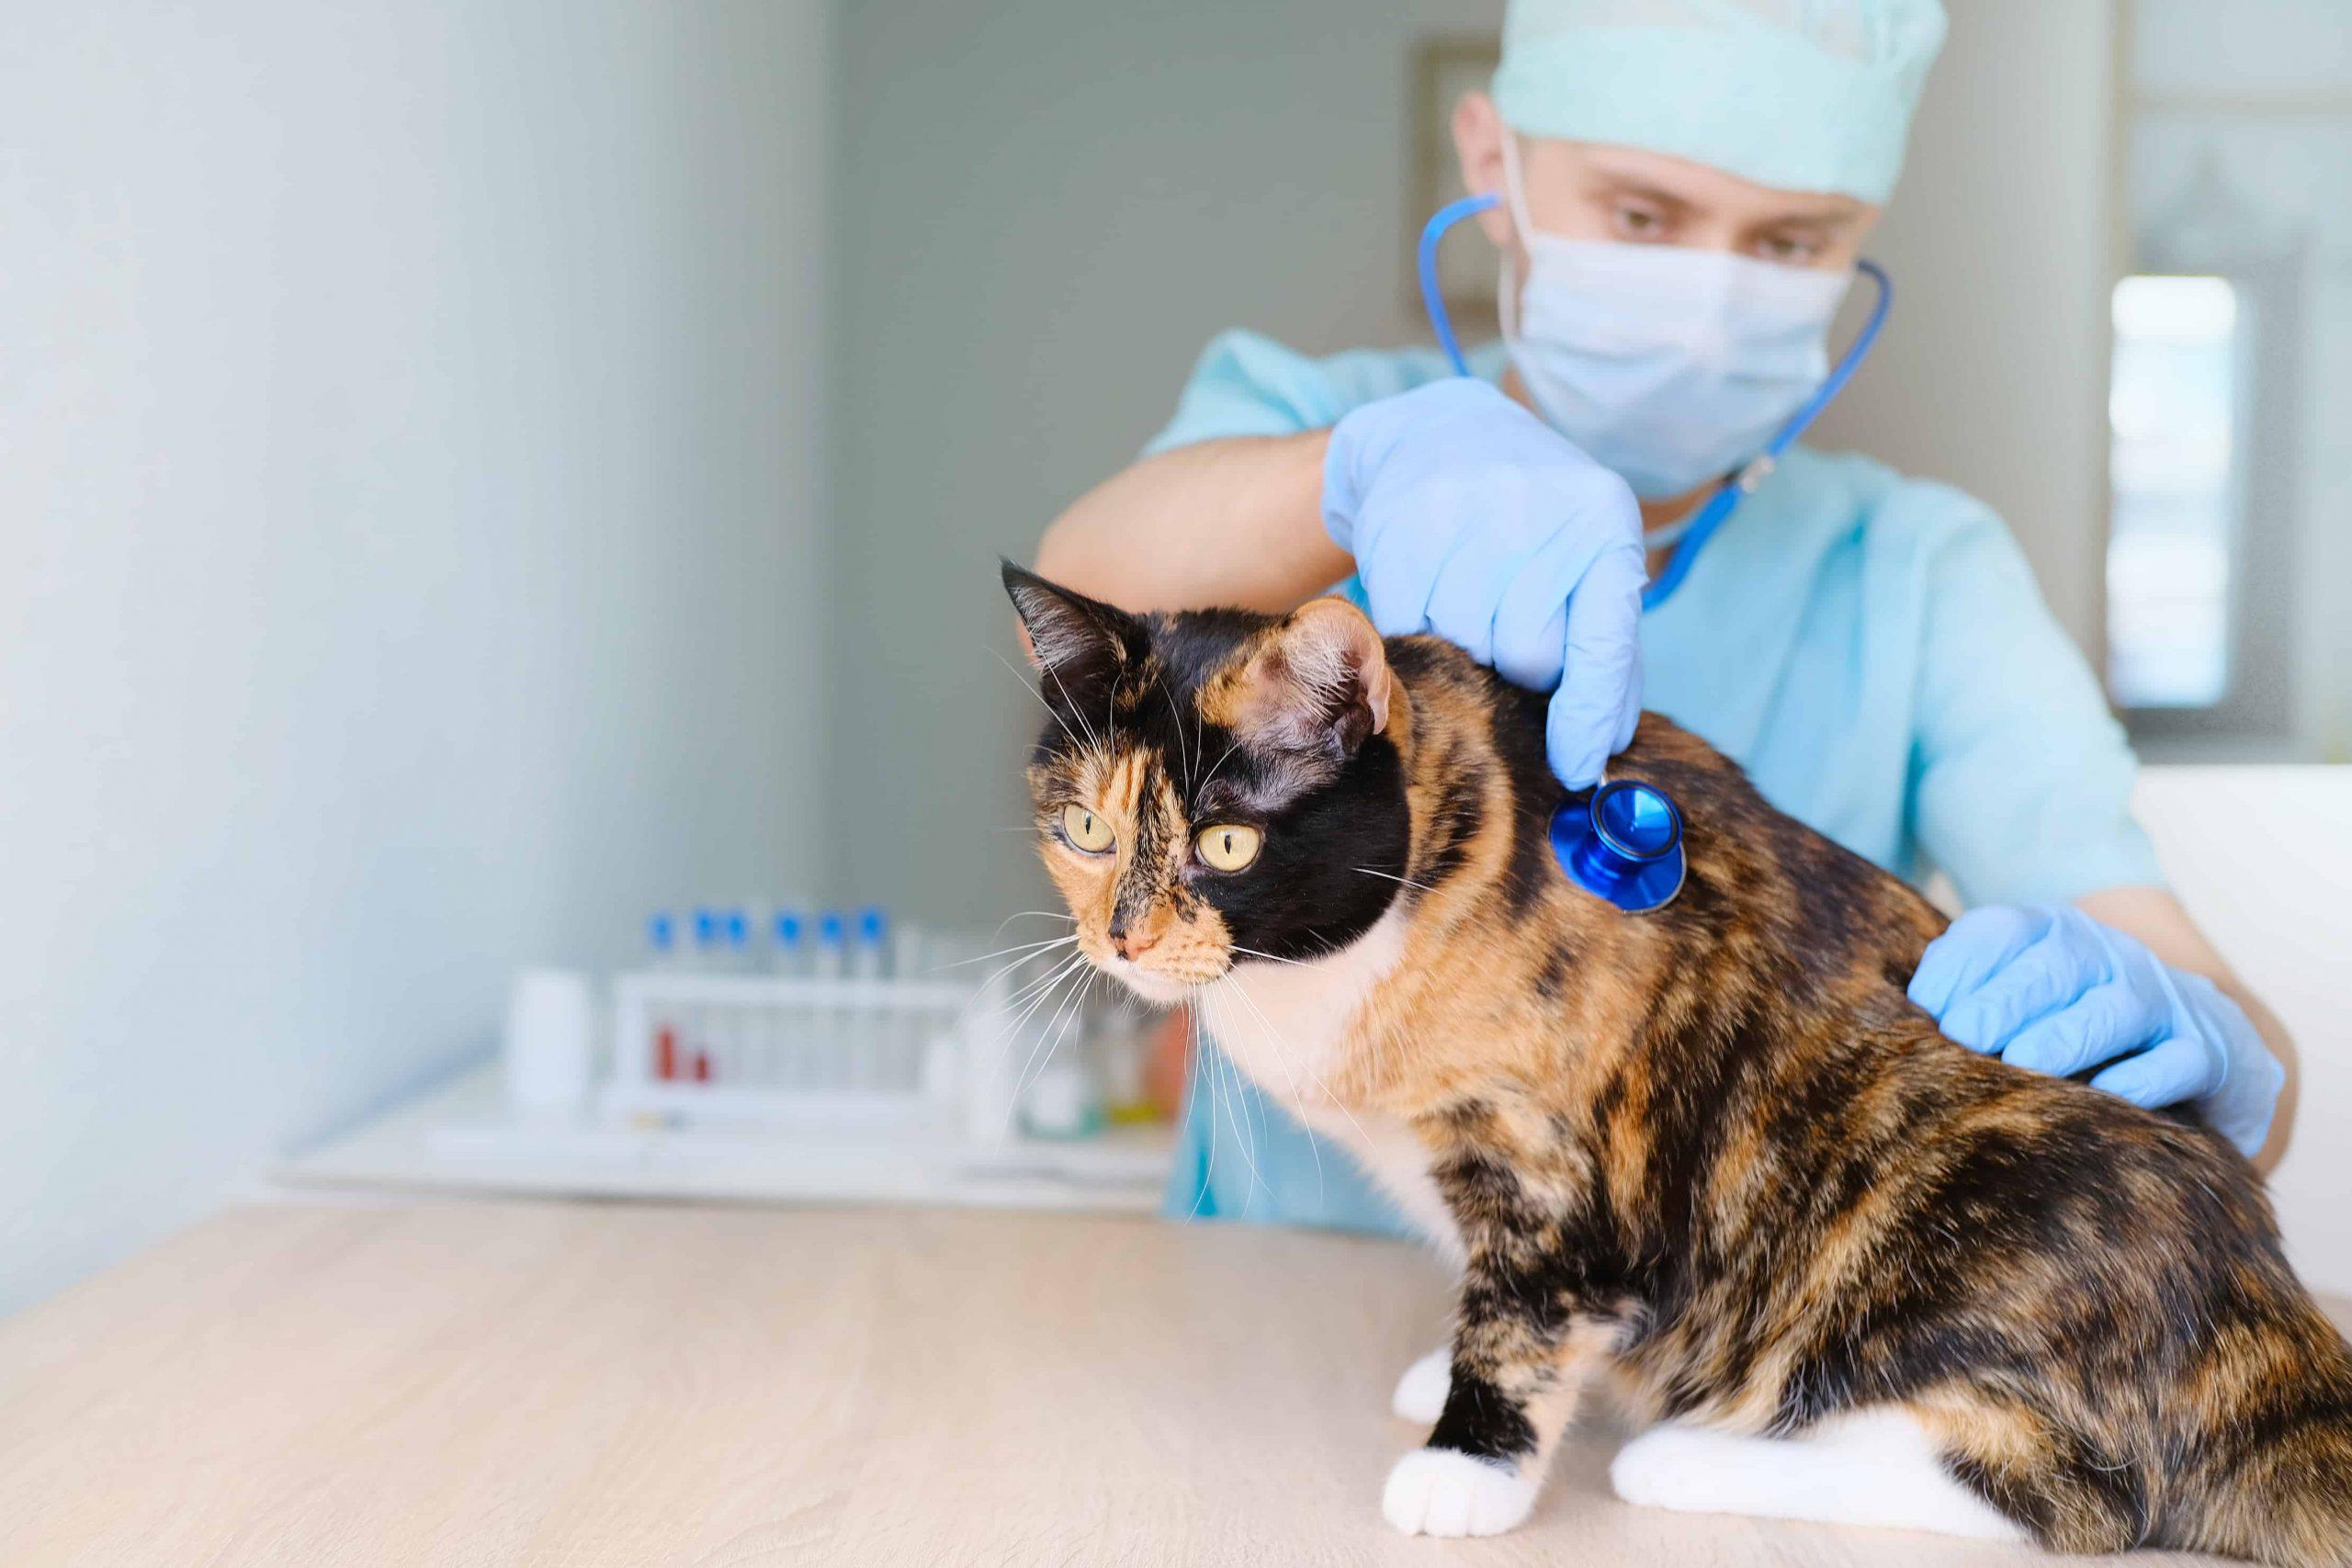 treatment of seizure in cats - doctor checking cat